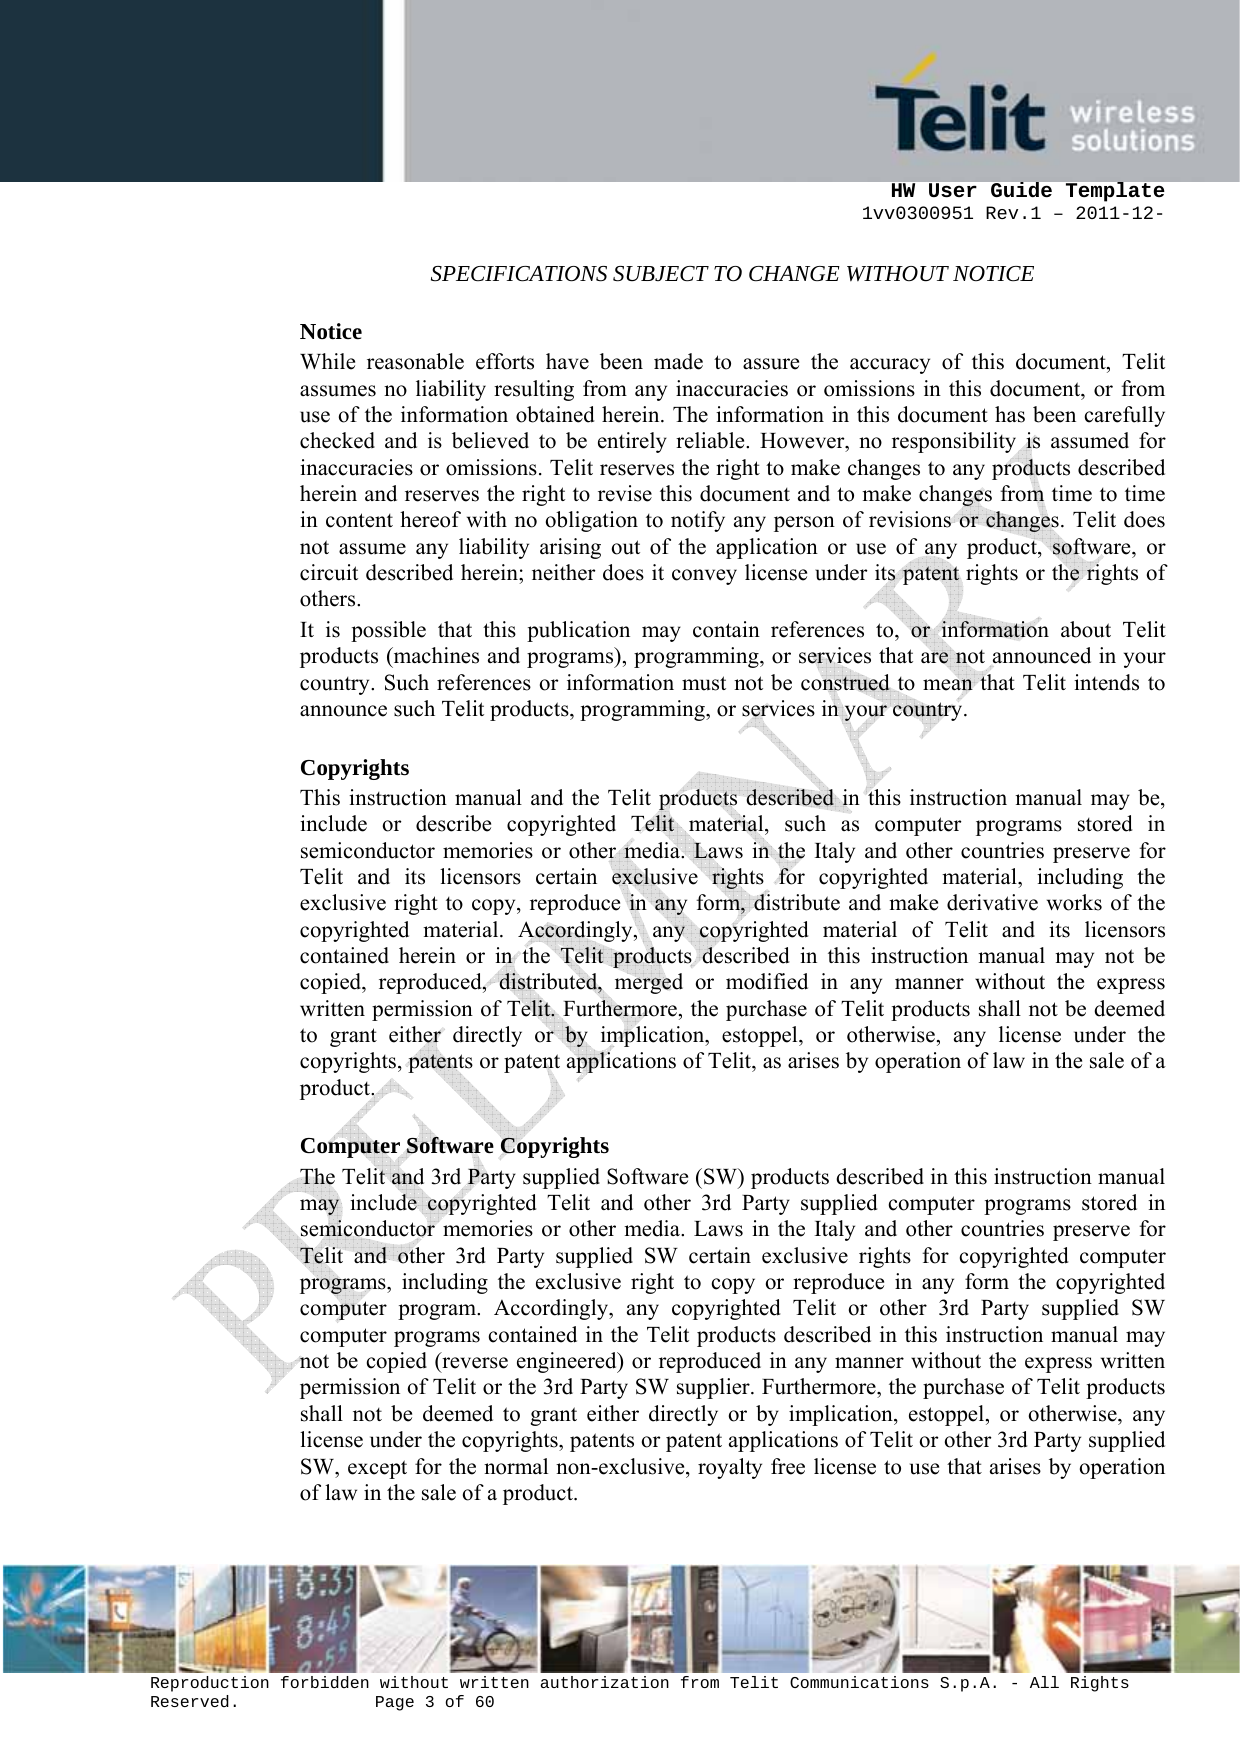      HW User Guide Template 1vv0300951 Rev.1 – 2011-12-  Reproduction forbidden without written authorization from Telit Communications S.p.A. - All Rights Reserved.    Page 3 of 60                                                     SPECIFICATIONS SUBJECT TO CHANGE WITHOUT NOTICE Notice While reasonable efforts have been made to assure the accuracy of this document, Telit assumes no liability resulting from any inaccuracies or omissions in this document, or from use of the information obtained herein. The information in this document has been carefully checked and is believed to be entirely reliable. However, no responsibility is assumed for inaccuracies or omissions. Telit reserves the right to make changes to any products described herein and reserves the right to revise this document and to make changes from time to time in content hereof with no obligation to notify any person of revisions or changes. Telit does not assume any liability arising out of the application or use of any product, software, or circuit described herein; neither does it convey license under its patent rights or the rights of others. It is possible that this publication may contain references to, or information about Telit products (machines and programs), programming, or services that are not announced in your country. Such references or information must not be construed to mean that Telit intends to announce such Telit products, programming, or services in your country. Copyrights This instruction manual and the Telit products described in this instruction manual may be, include or describe copyrighted Telit material, such as computer programs stored in semiconductor memories or other media. Laws in the Italy and other countries preserve for Telit and its licensors certain exclusive rights for copyrighted material, including the exclusive right to copy, reproduce in any form, distribute and make derivative works of the copyrighted material. Accordingly, any copyrighted material of Telit and its licensors contained herein or in the Telit products described in this instruction manual may not be copied, reproduced, distributed, merged or modified in any manner without the express written permission of Telit. Furthermore, the purchase of Telit products shall not be deemed to grant either directly or by implication, estoppel, or otherwise, any license under the copyrights, patents or patent applications of Telit, as arises by operation of law in the sale of a product. Computer Software Copyrights The Telit and 3rd Party supplied Software (SW) products described in this instruction manual may include copyrighted Telit and other 3rd Party supplied computer programs stored in semiconductor memories or other media. Laws in the Italy and other countries preserve for Telit and other 3rd Party supplied SW certain exclusive rights for copyrighted computer programs, including the exclusive right to copy or reproduce in any form the copyrighted computer program. Accordingly, any copyrighted Telit or other 3rd Party supplied SW computer programs contained in the Telit products described in this instruction manual may not be copied (reverse engineered) or reproduced in any manner without the express written permission of Telit or the 3rd Party SW supplier. Furthermore, the purchase of Telit products shall not be deemed to grant either directly or by implication, estoppel, or otherwise, any license under the copyrights, patents or patent applications of Telit or other 3rd Party supplied SW, except for the normal non-exclusive, royalty free license to use that arises by operation of law in the sale of a product.    